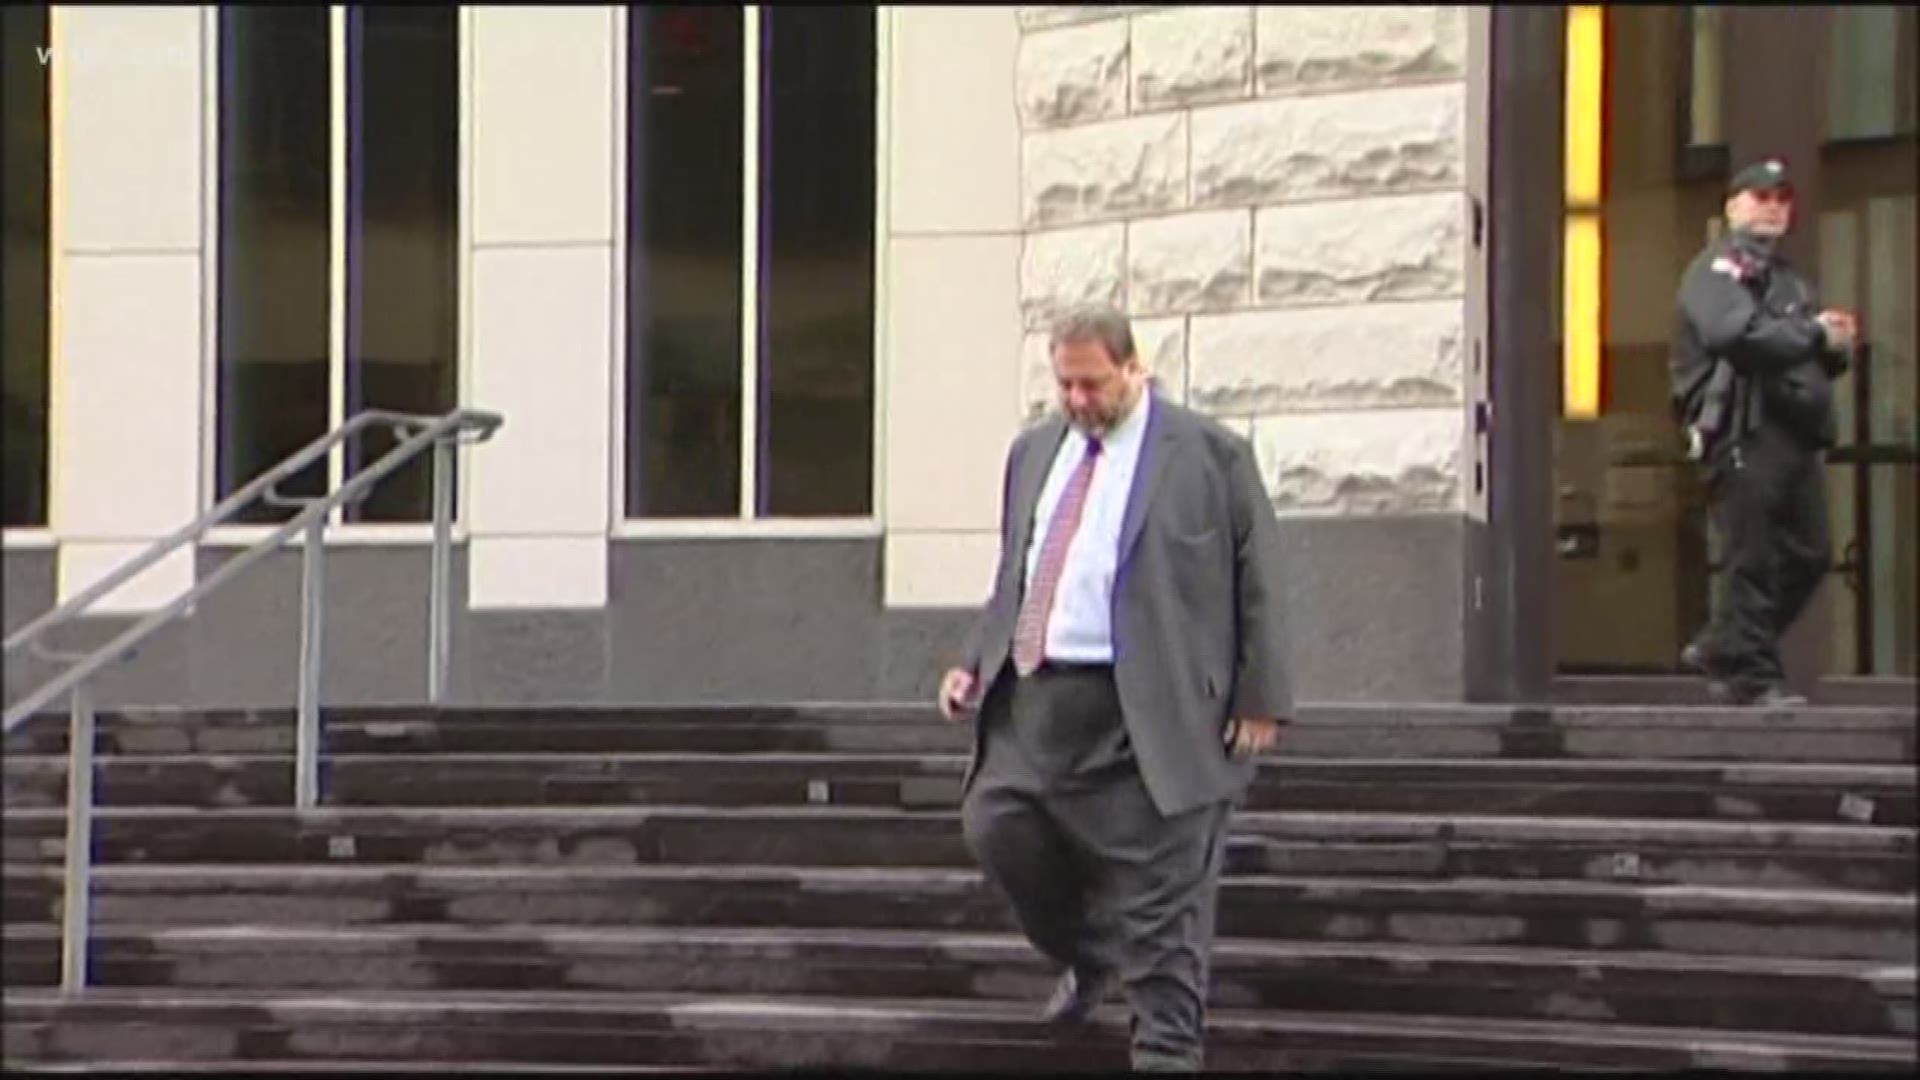 Judge denies appeal of former Cuyahoga County Commissioner Jimmy Dimora's corruption convictions